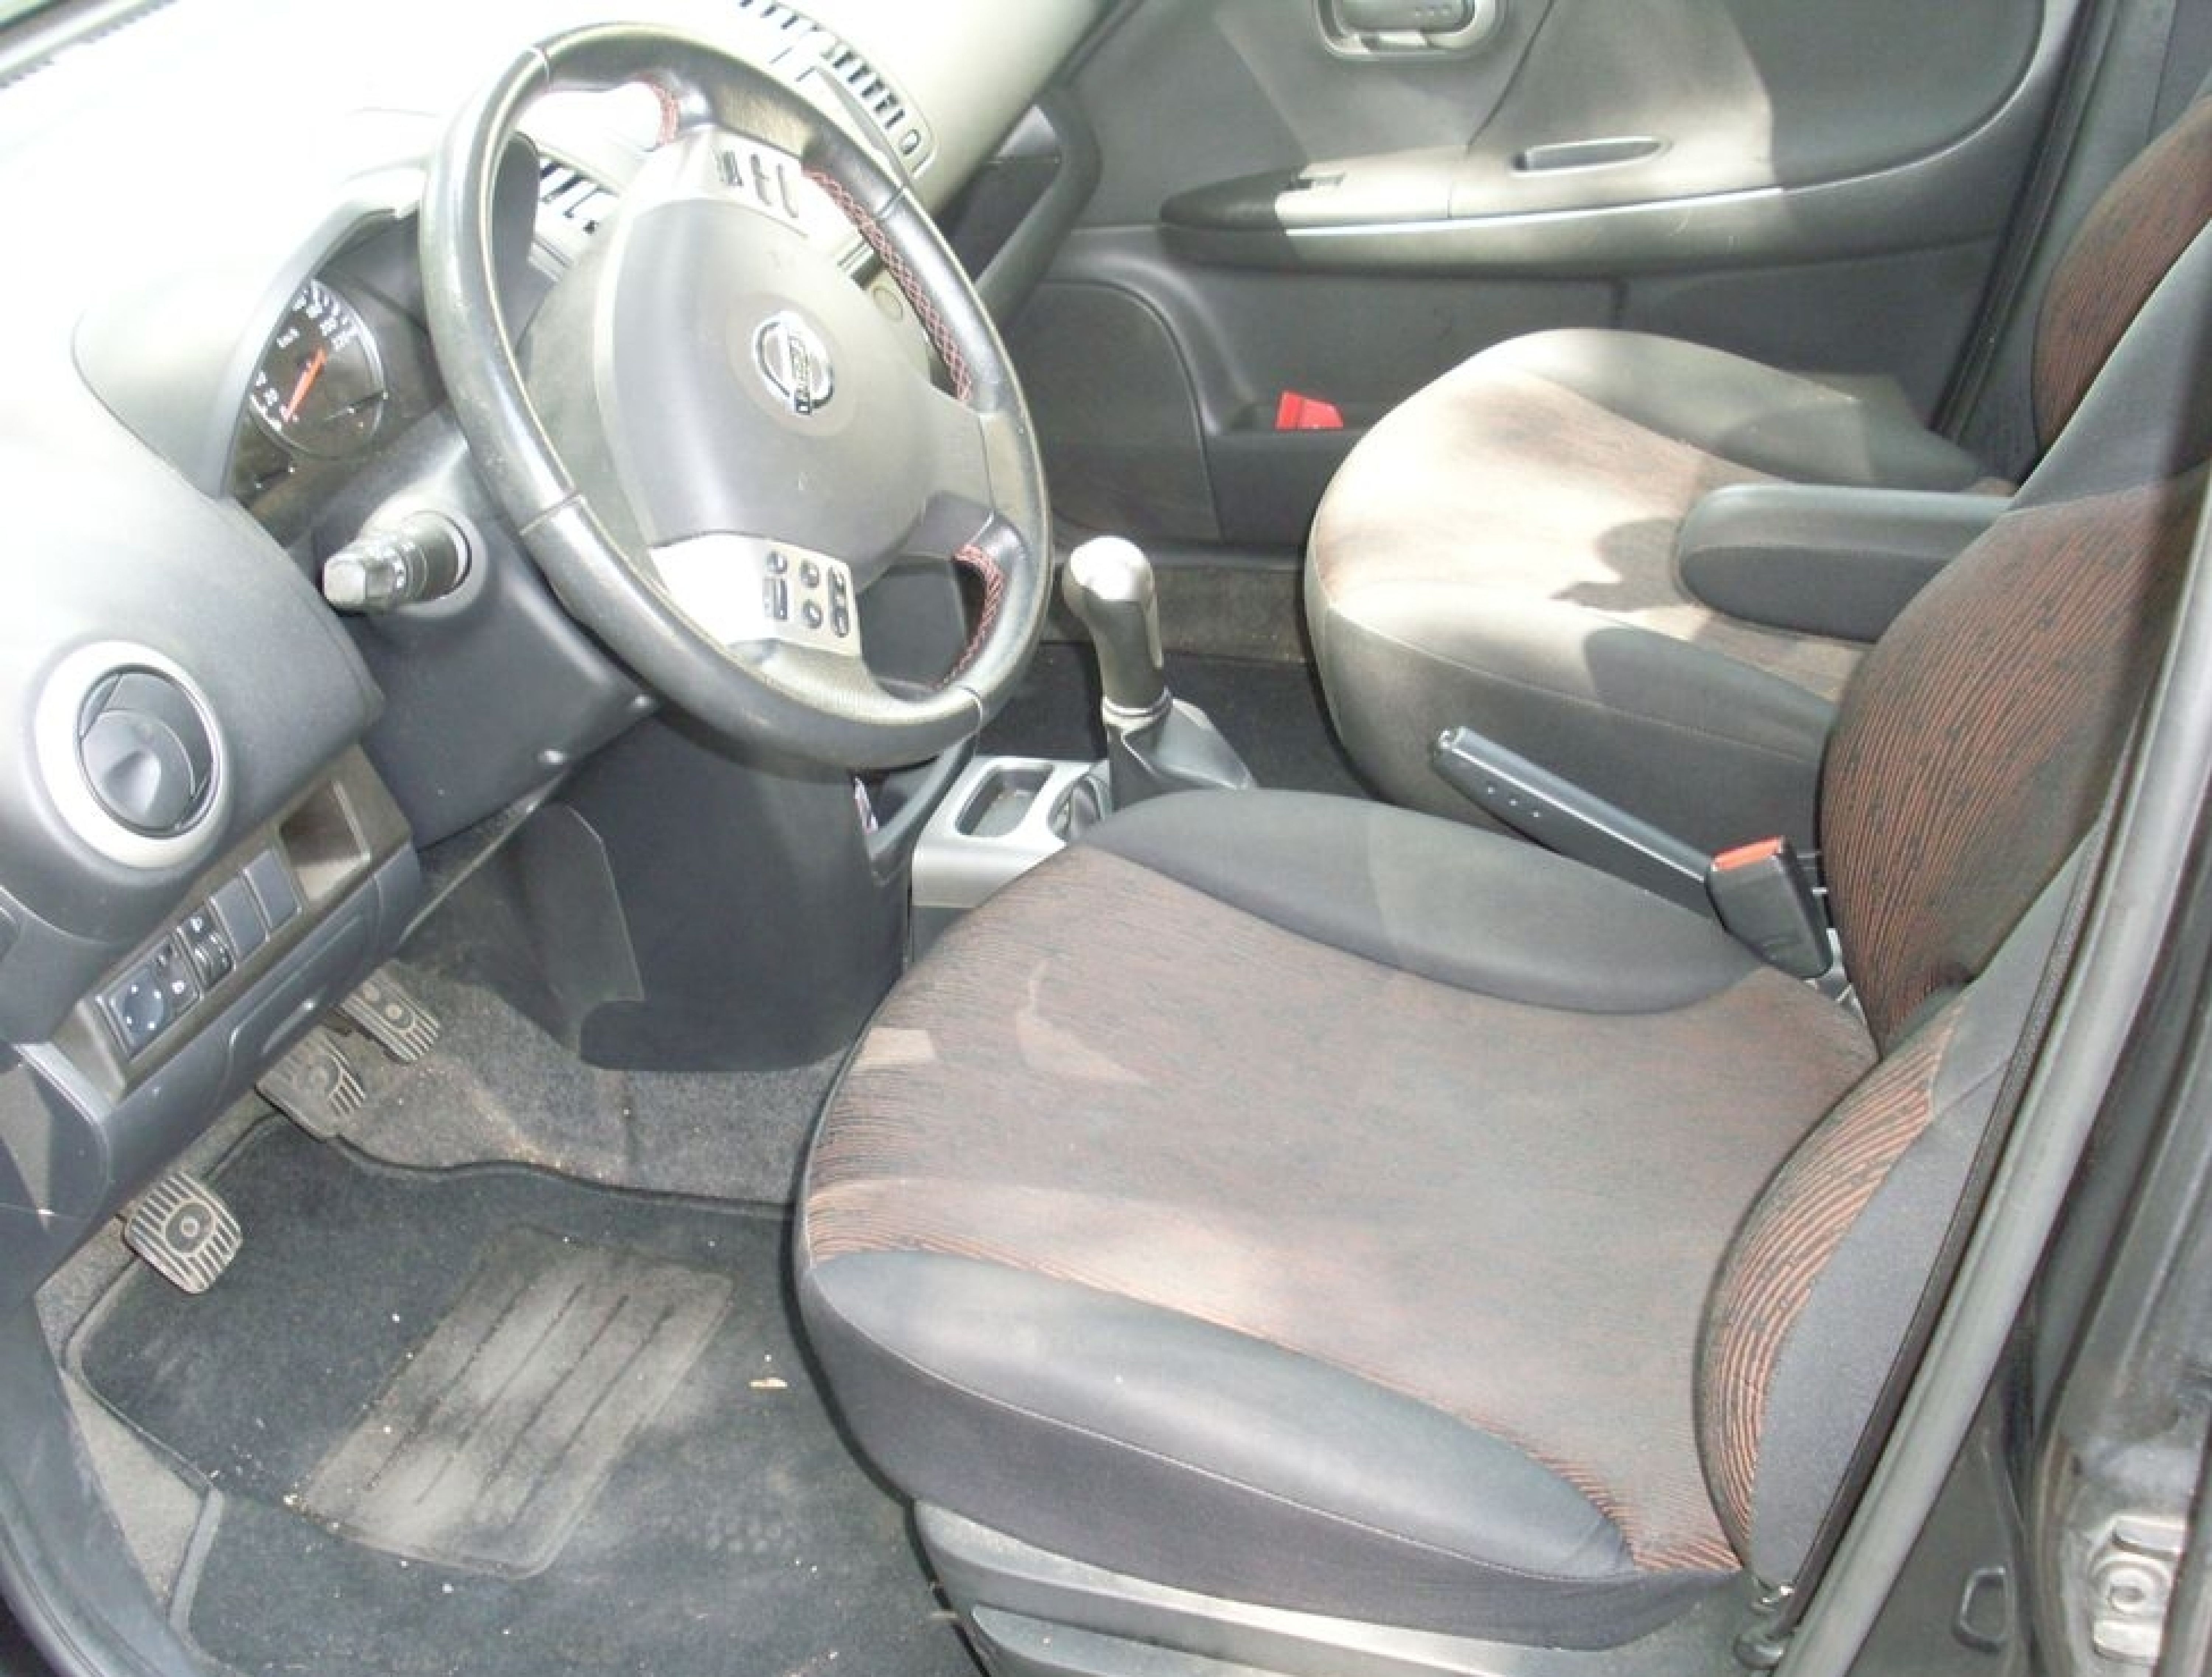 Nissan note, 1.5 dci - Photo 3